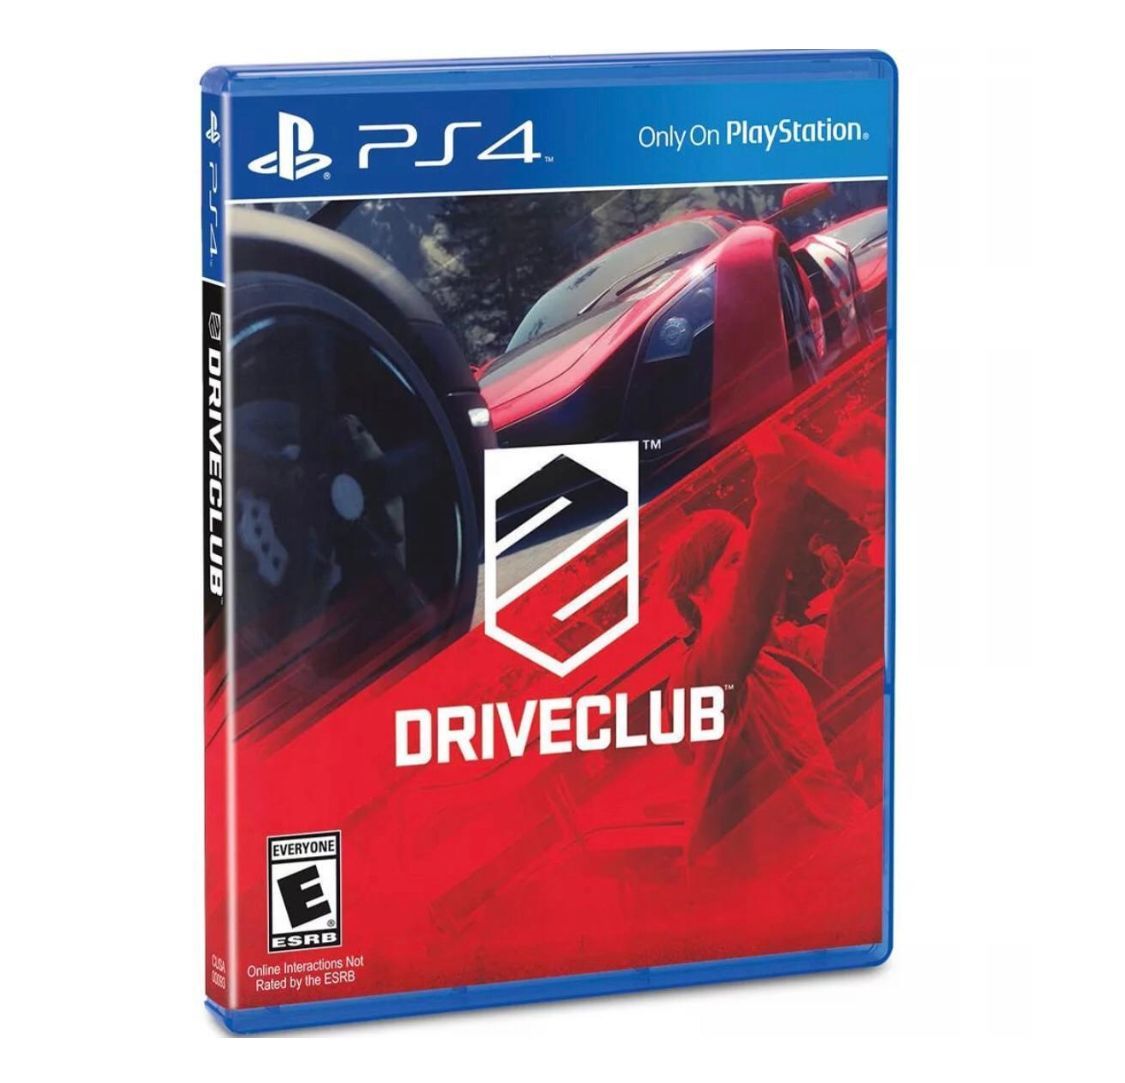 Playstation rus. DRIVECLUB ps4 диск. Игры для ps4 диски DRIVECLUB. Игра ps4 DRIVECLUB. (PLAYSTATION 4. DRIVECLUB на пс4.